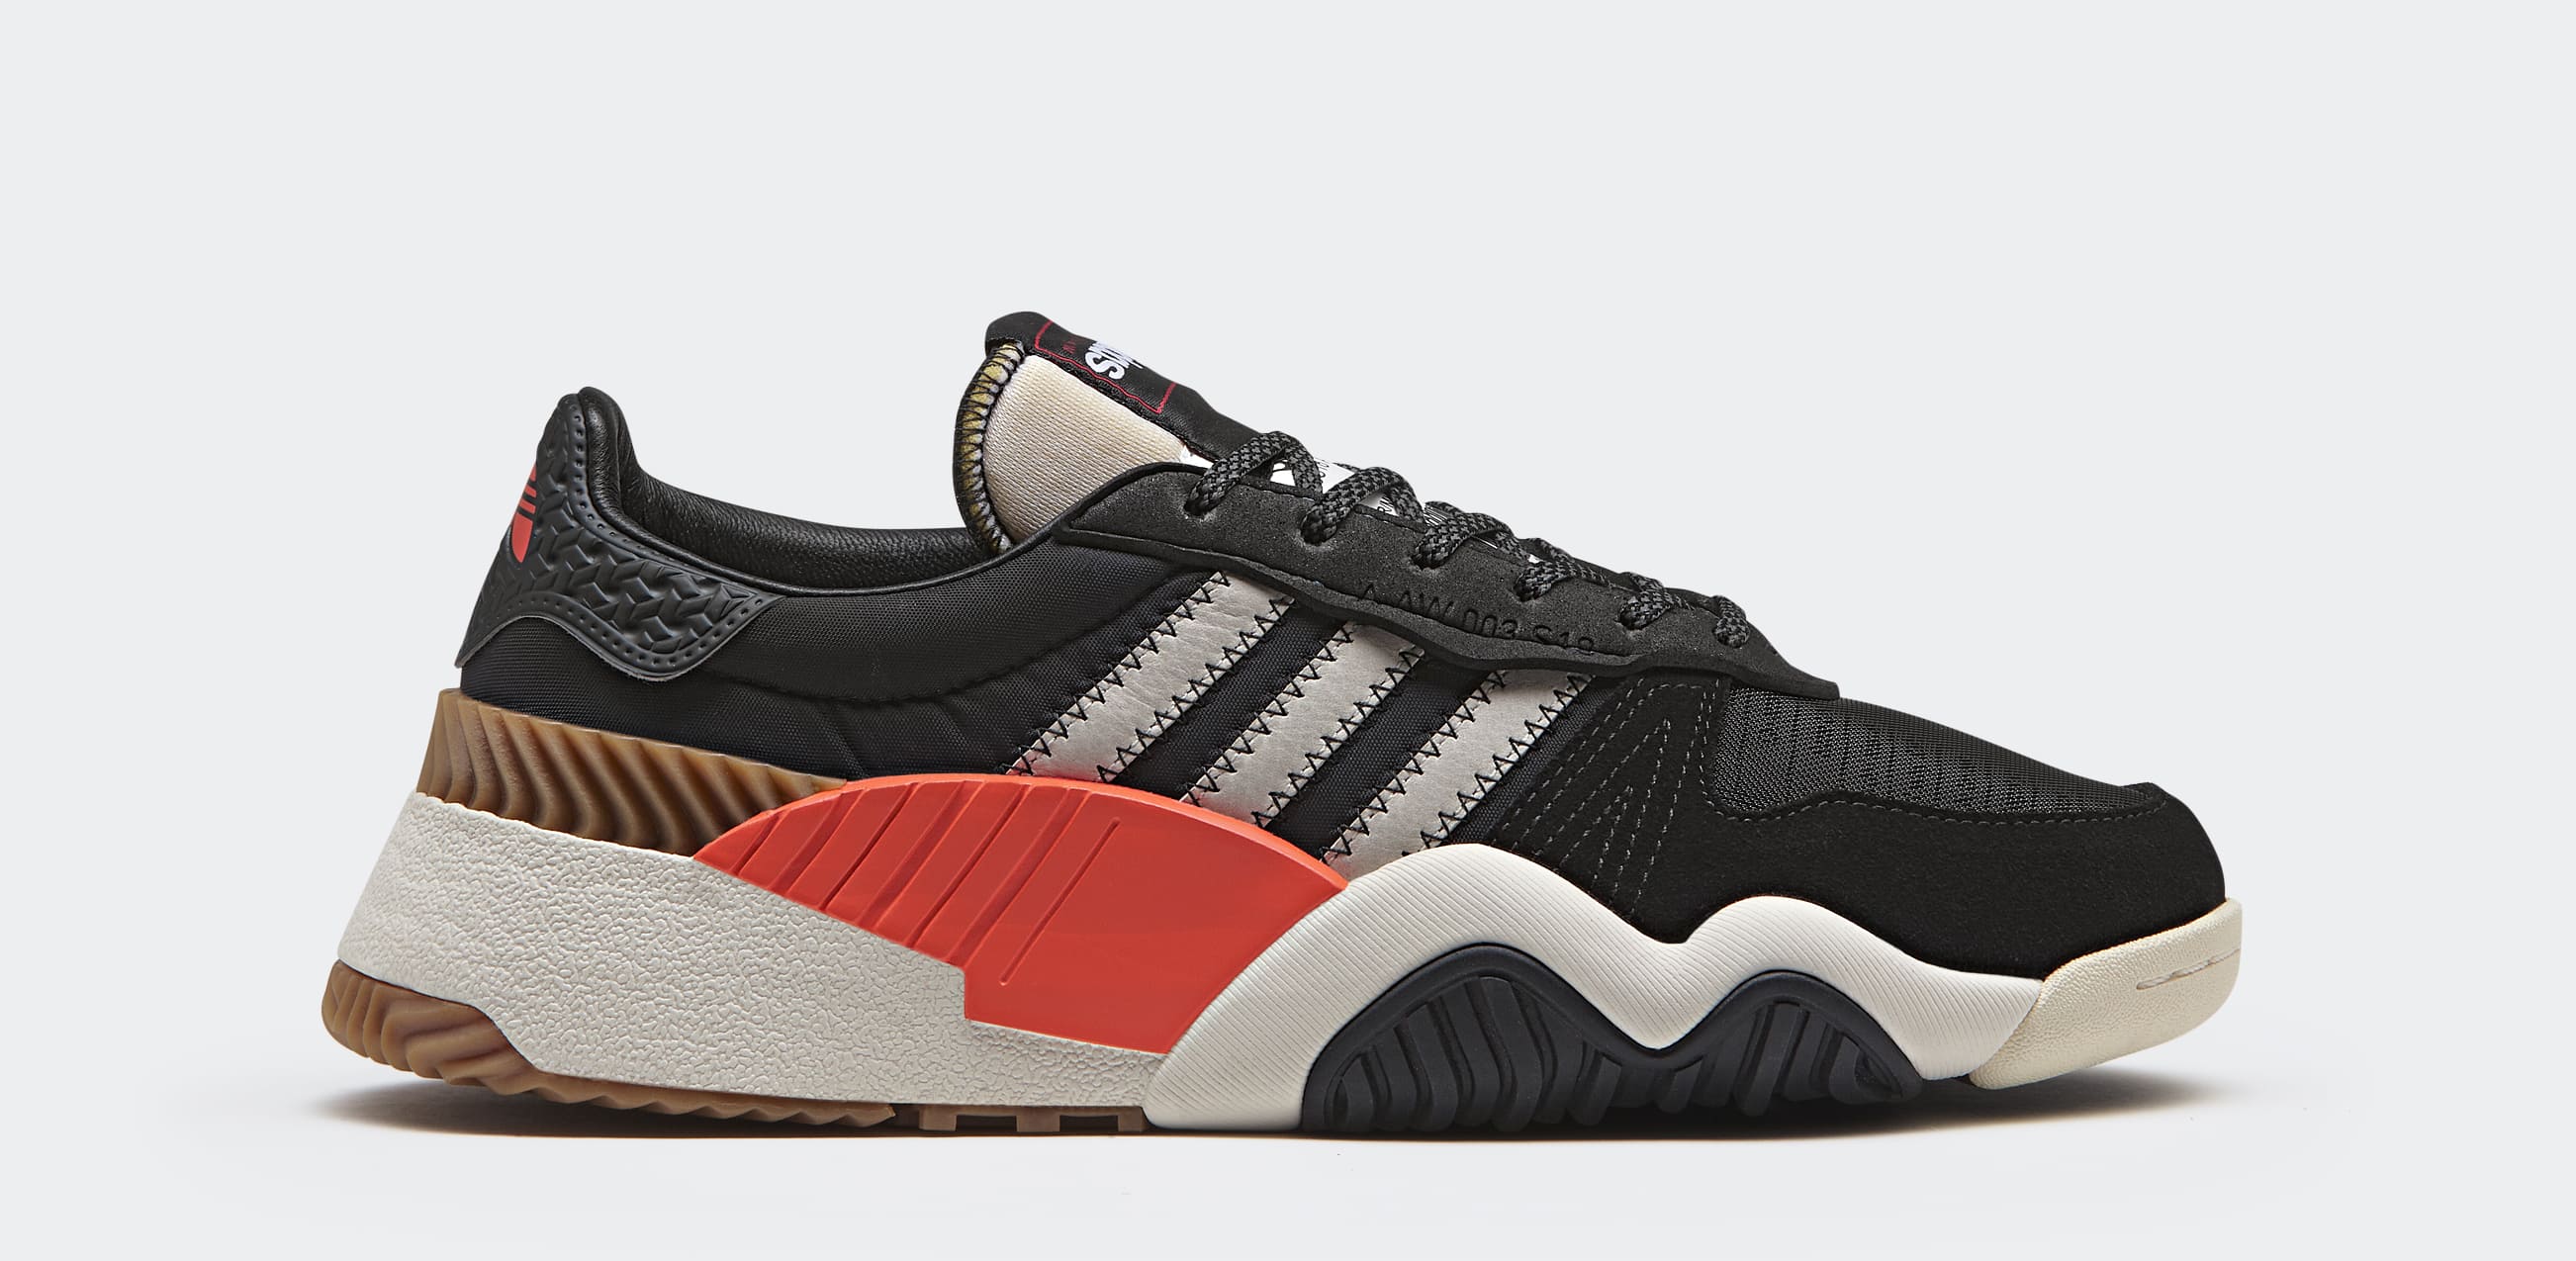 Alexander Wang's latest trainers are 